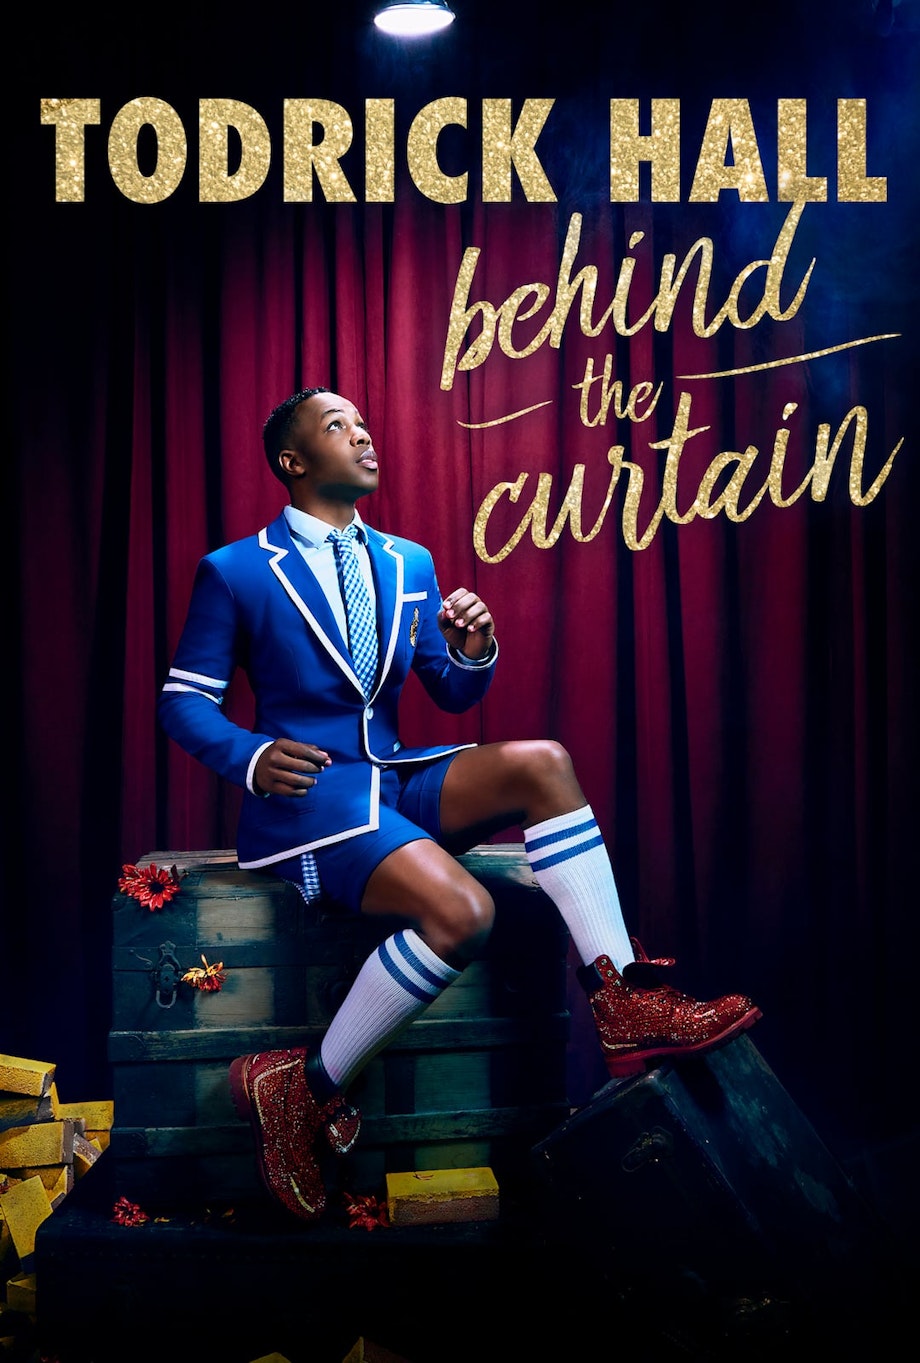 Behind The Curtain: Todrick Hall